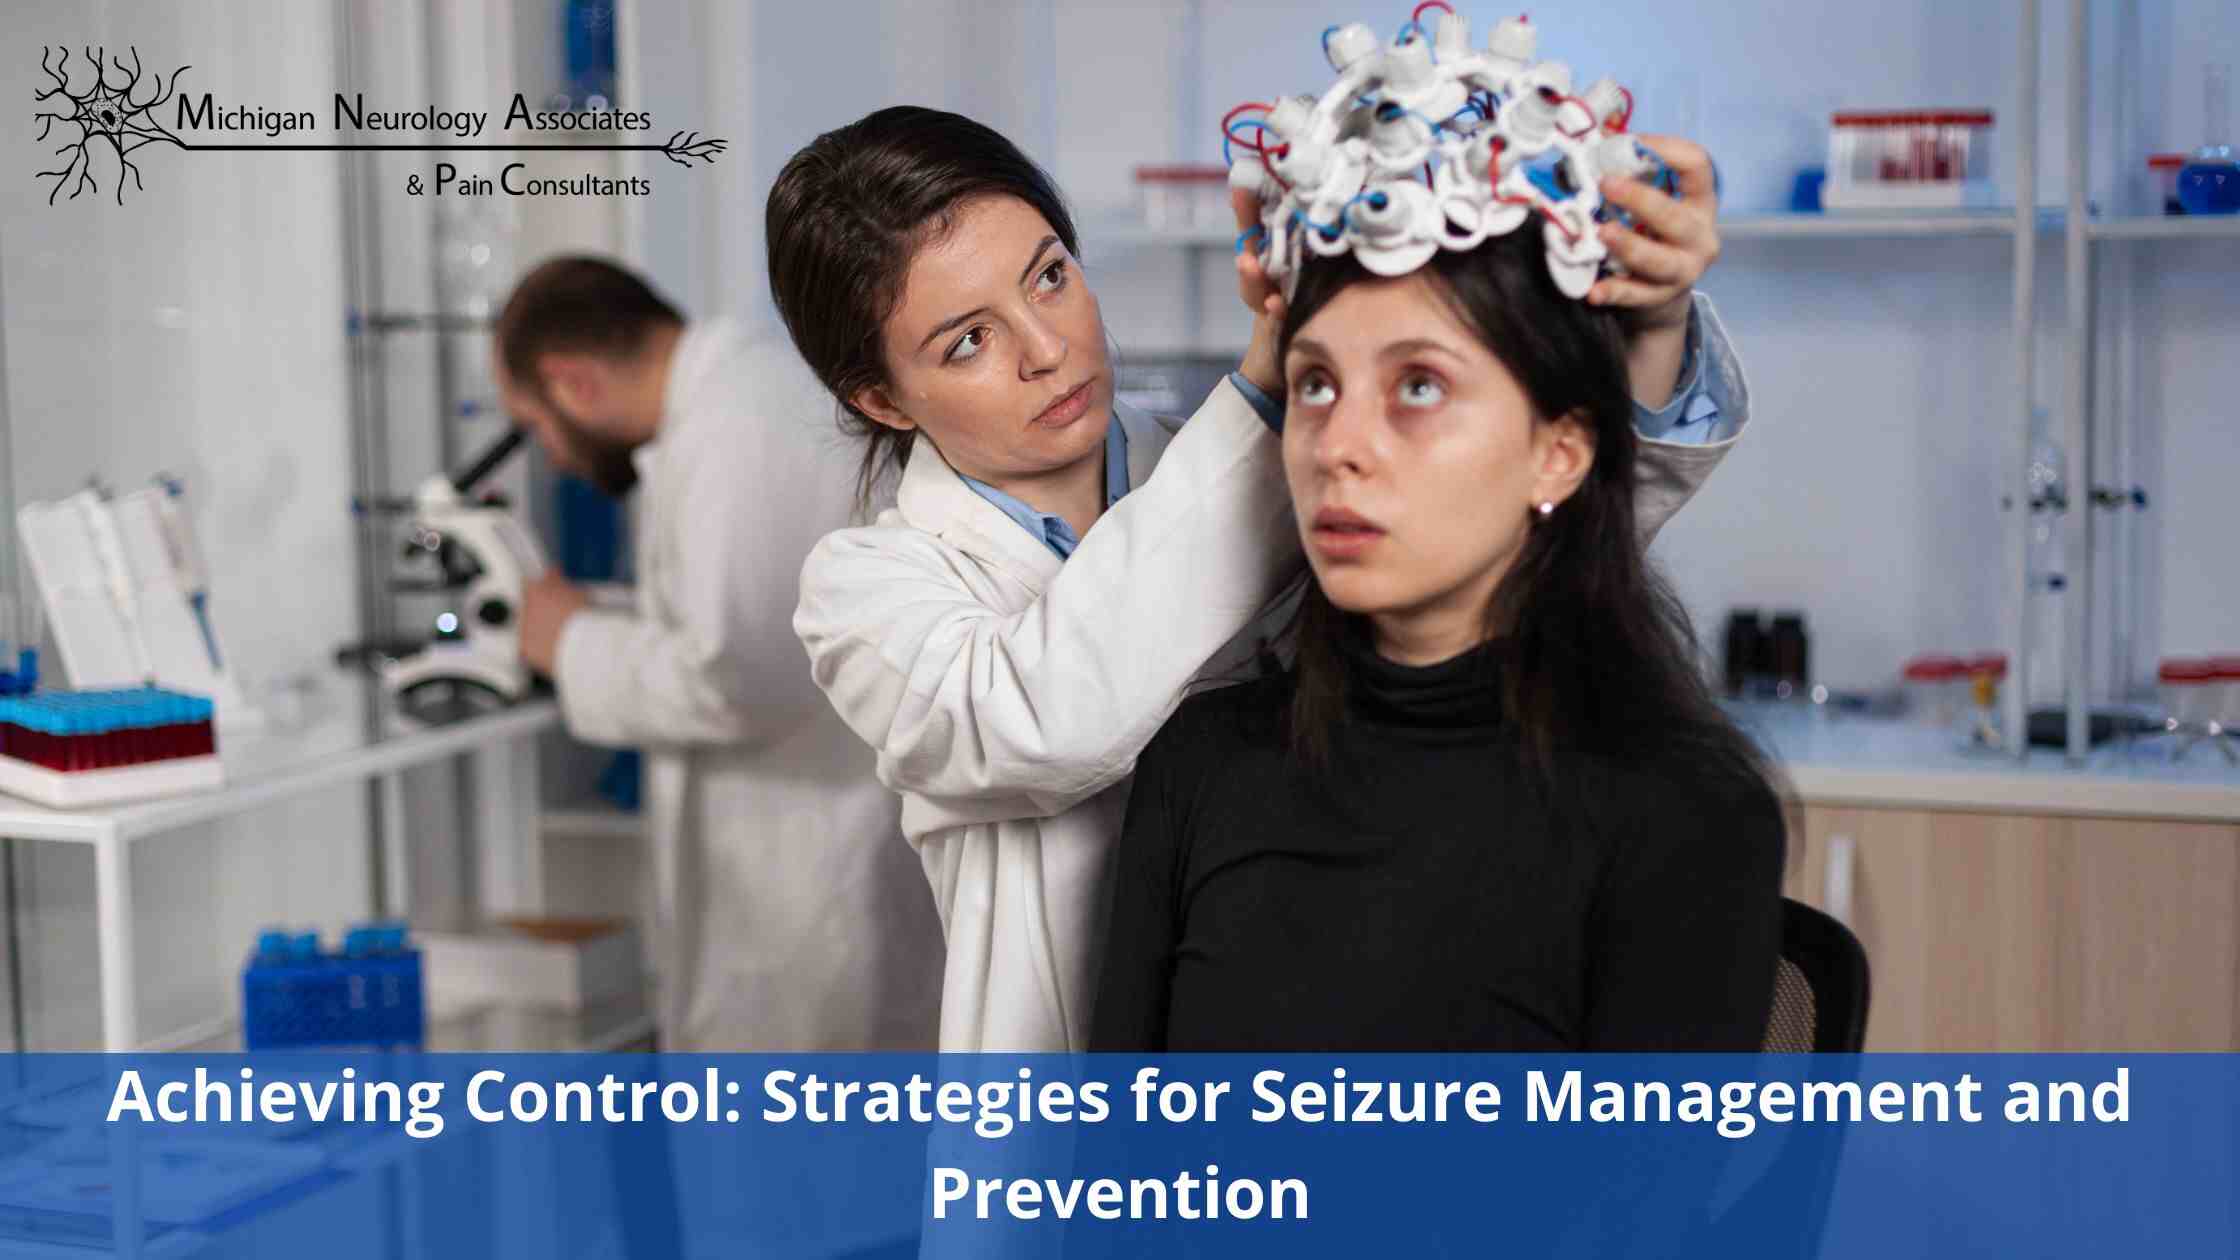 Achieving Control: Strategies for Seizure Management and Prevention